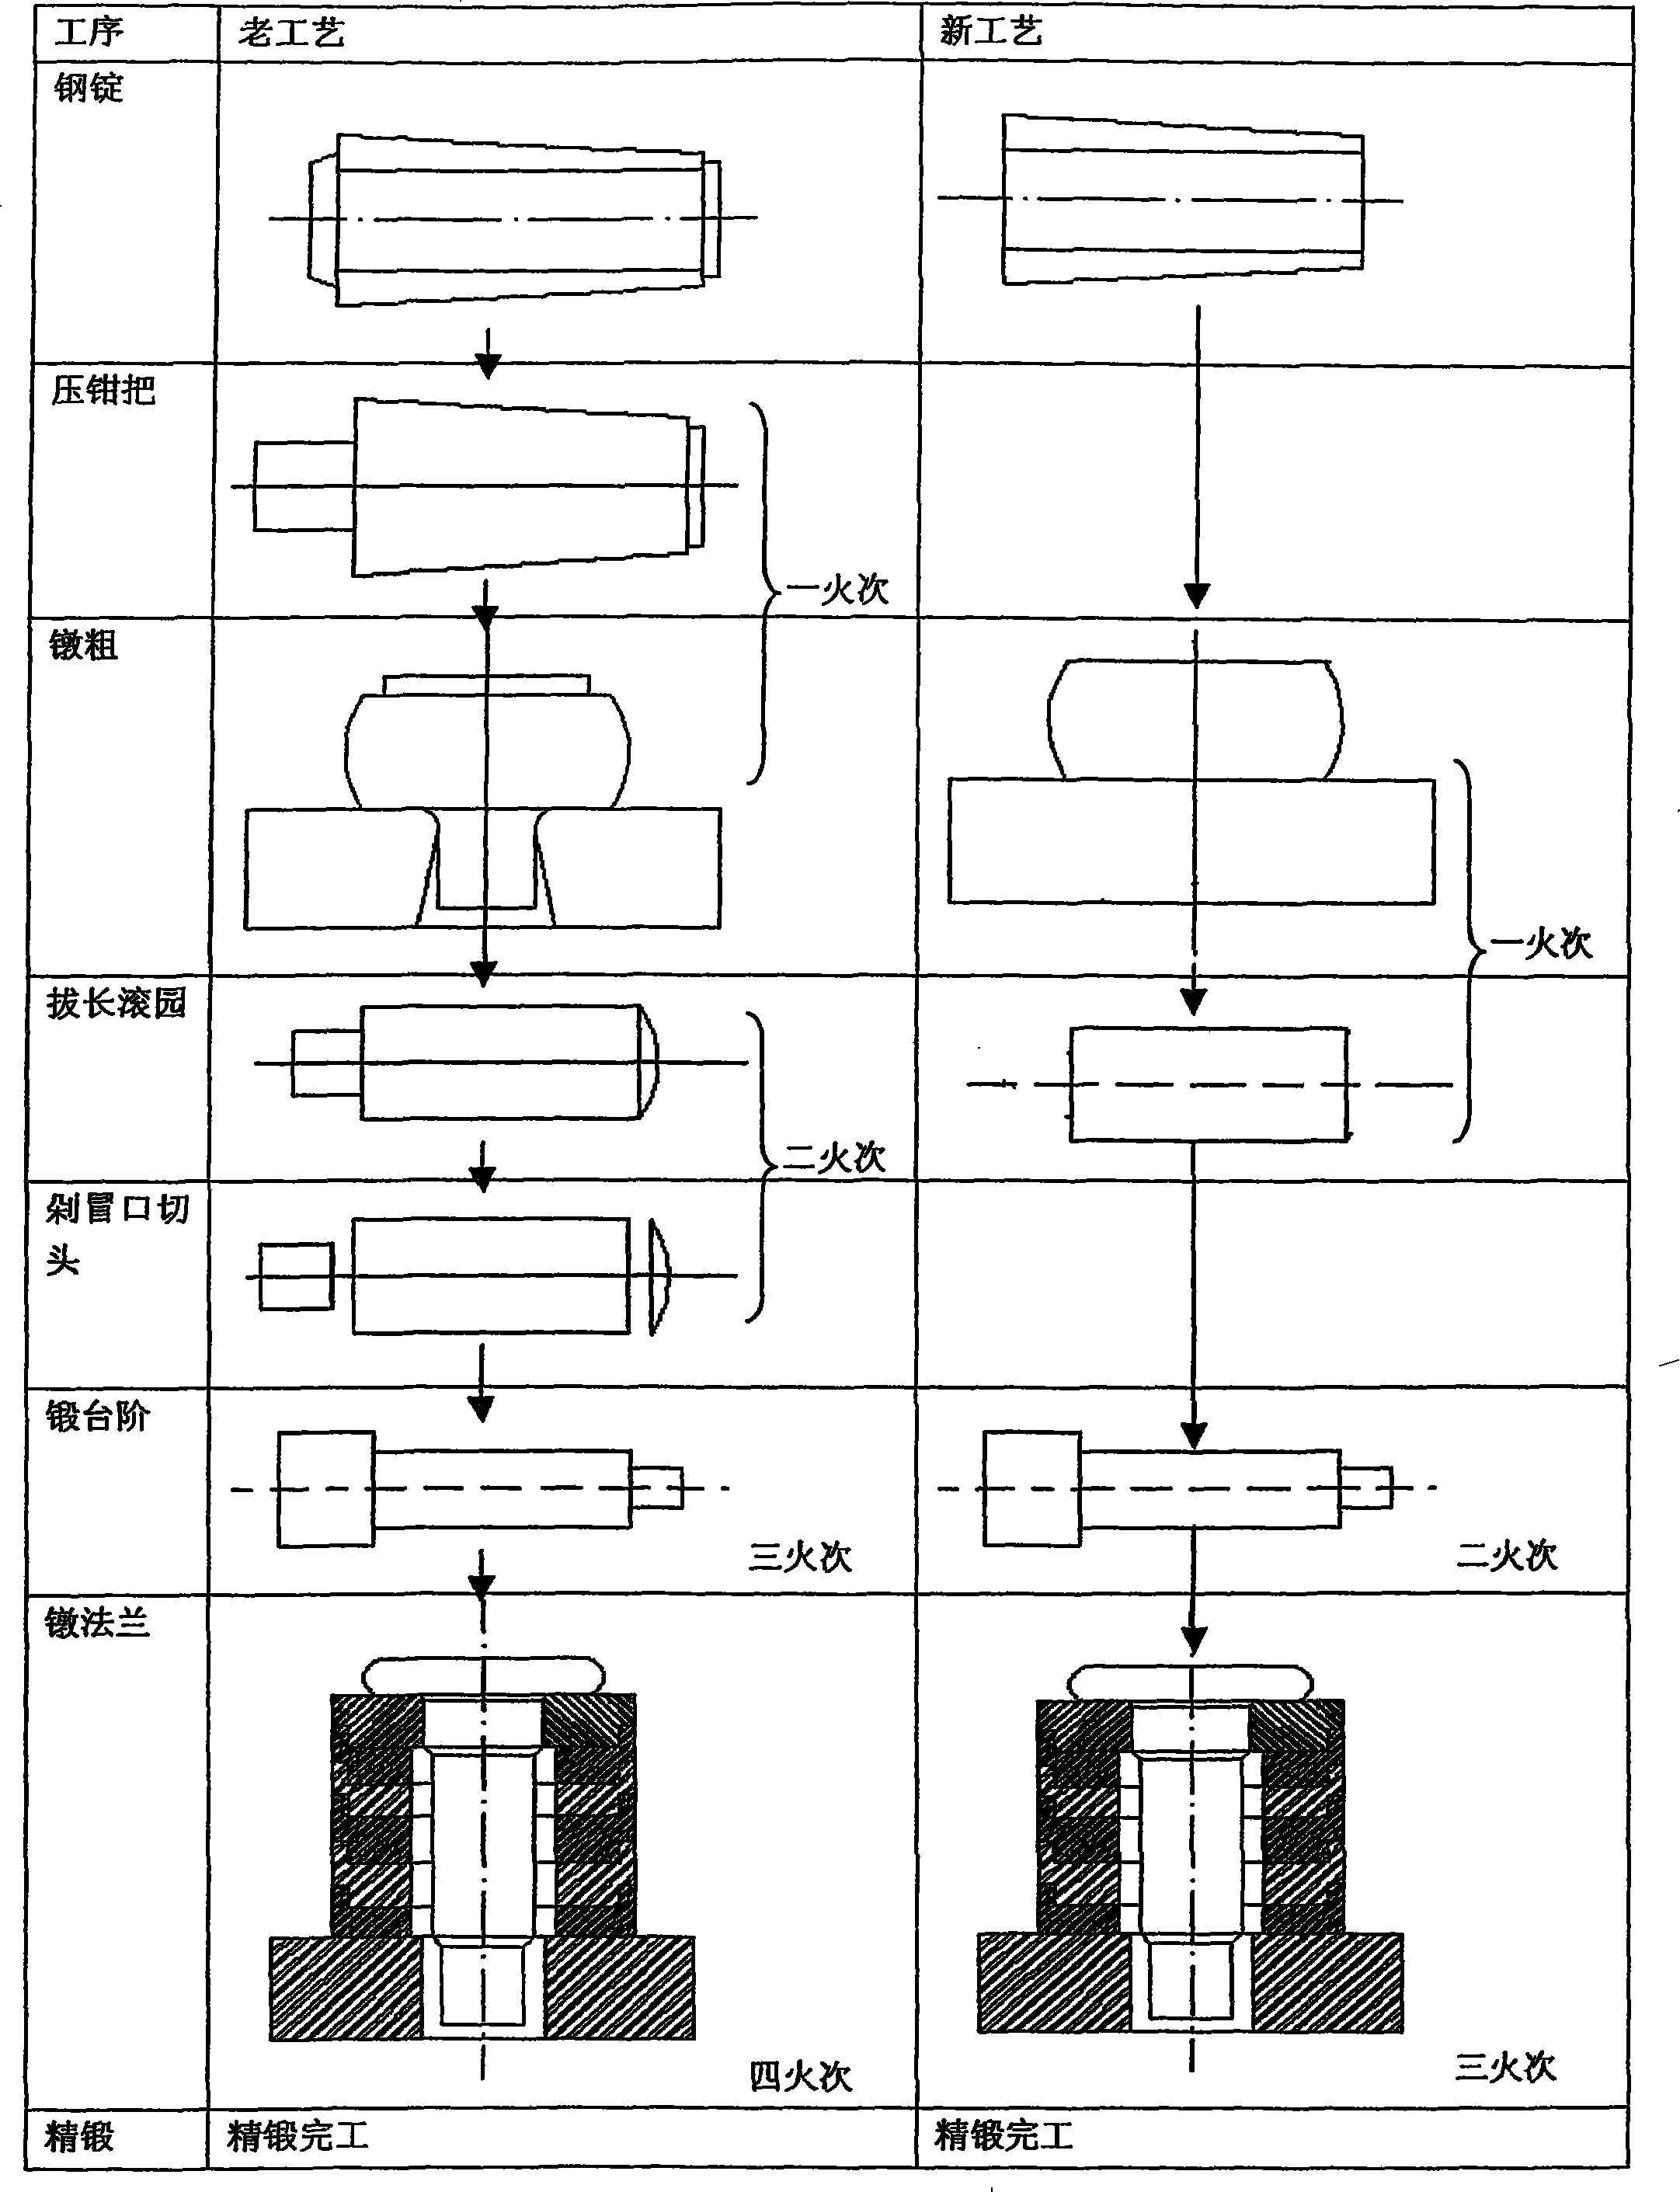 Non-flash groove, non ingot tail smithing method for large-scale wind power principal axle